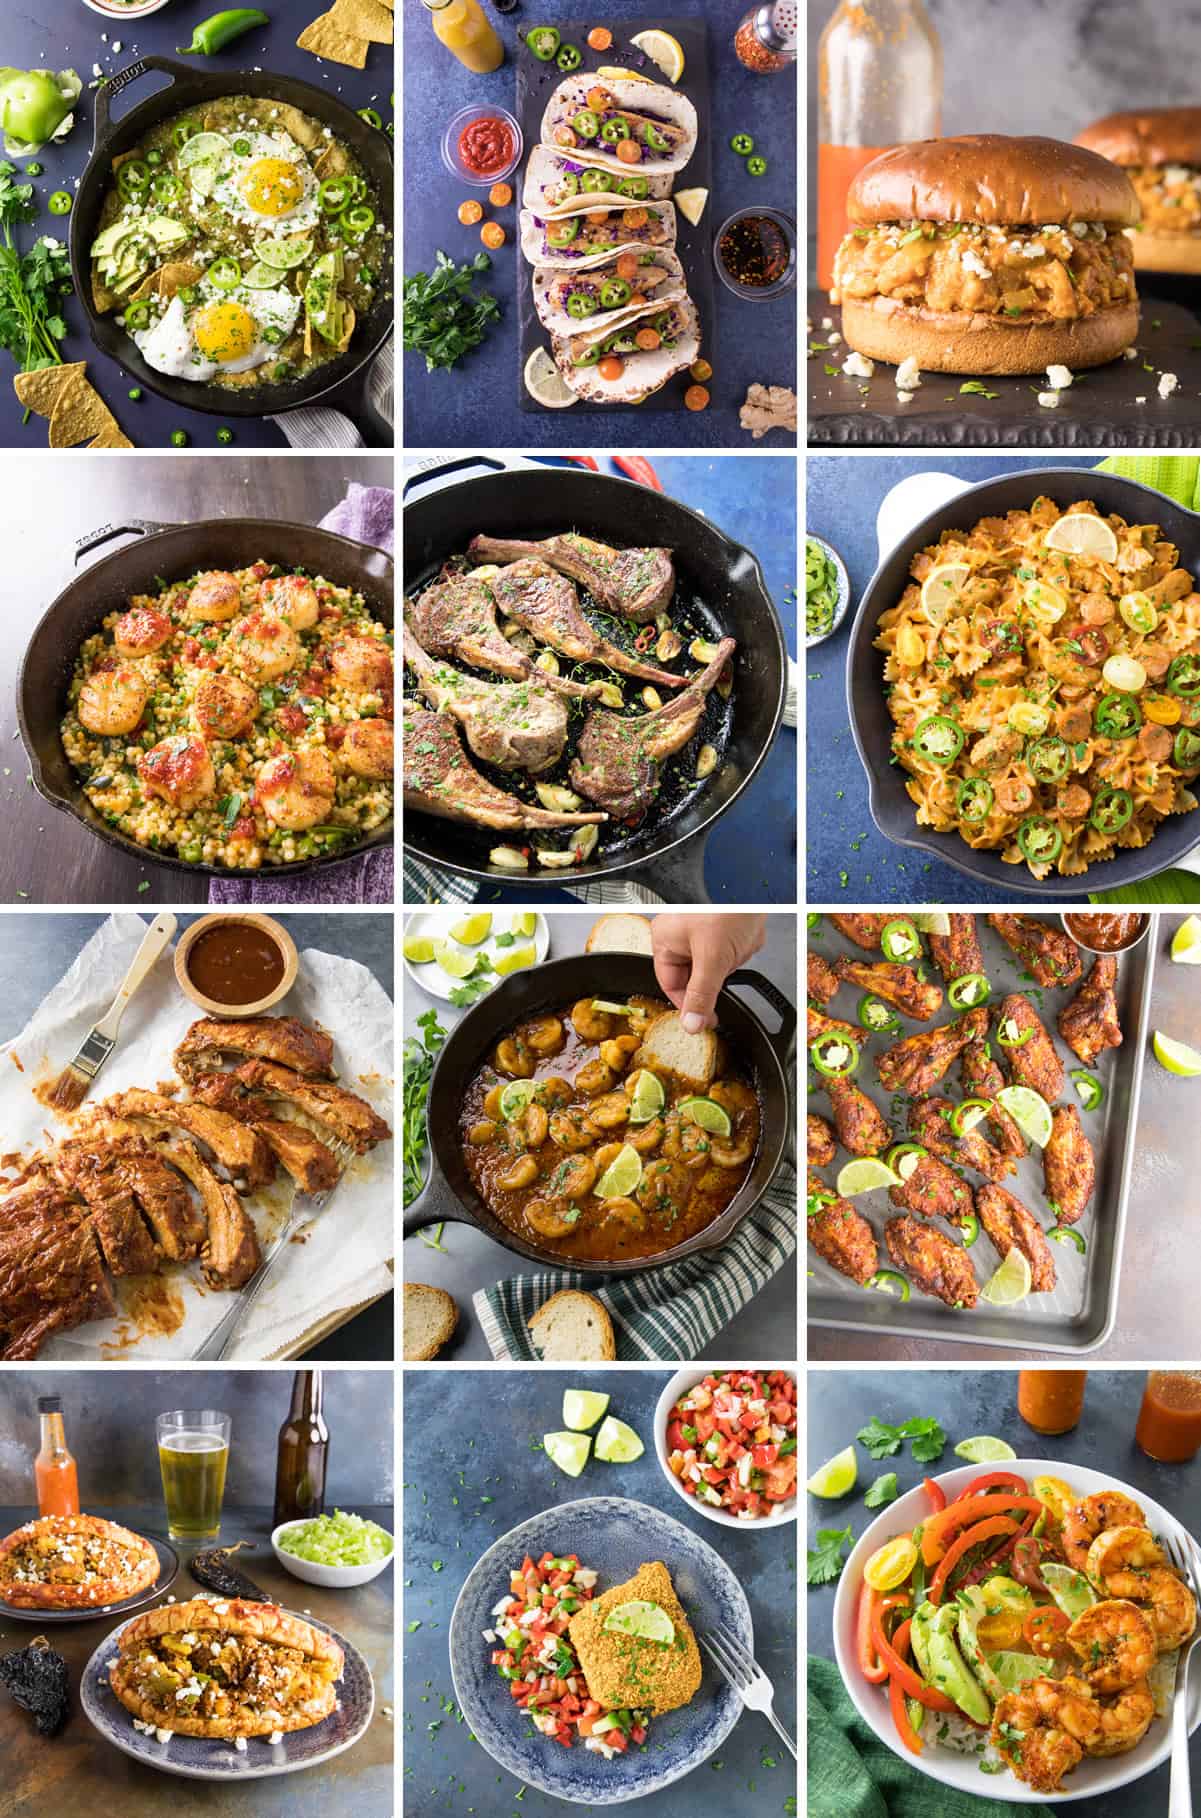 Photos from The Spicy Food Lovers' Cookbook - Fiery, No-Fuss Meals, by Michael Hultquist